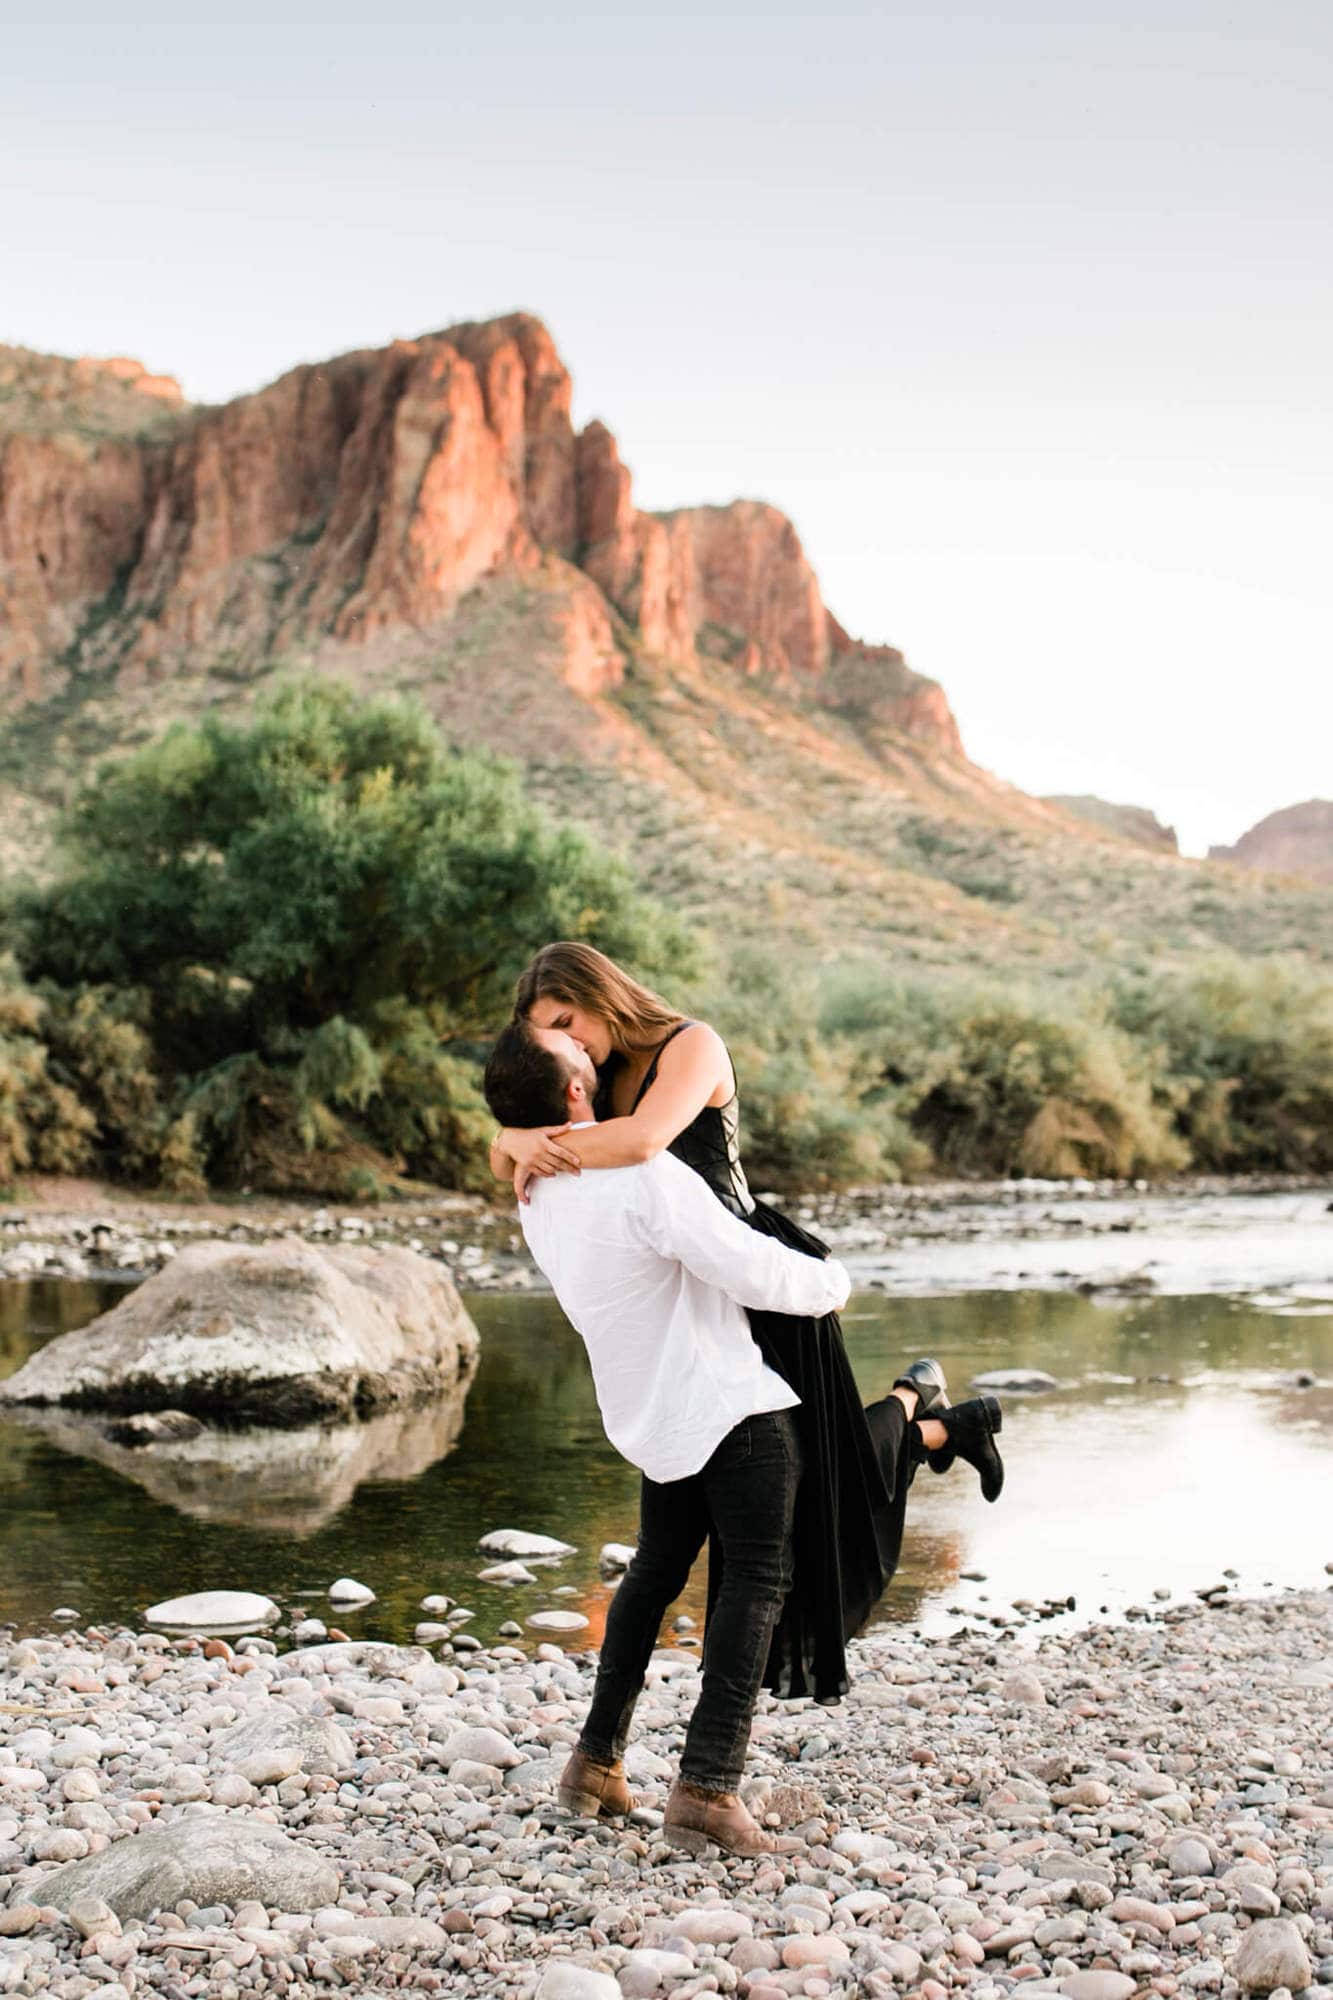 Groom picks up his bride as they play on the shores of the Salt River.